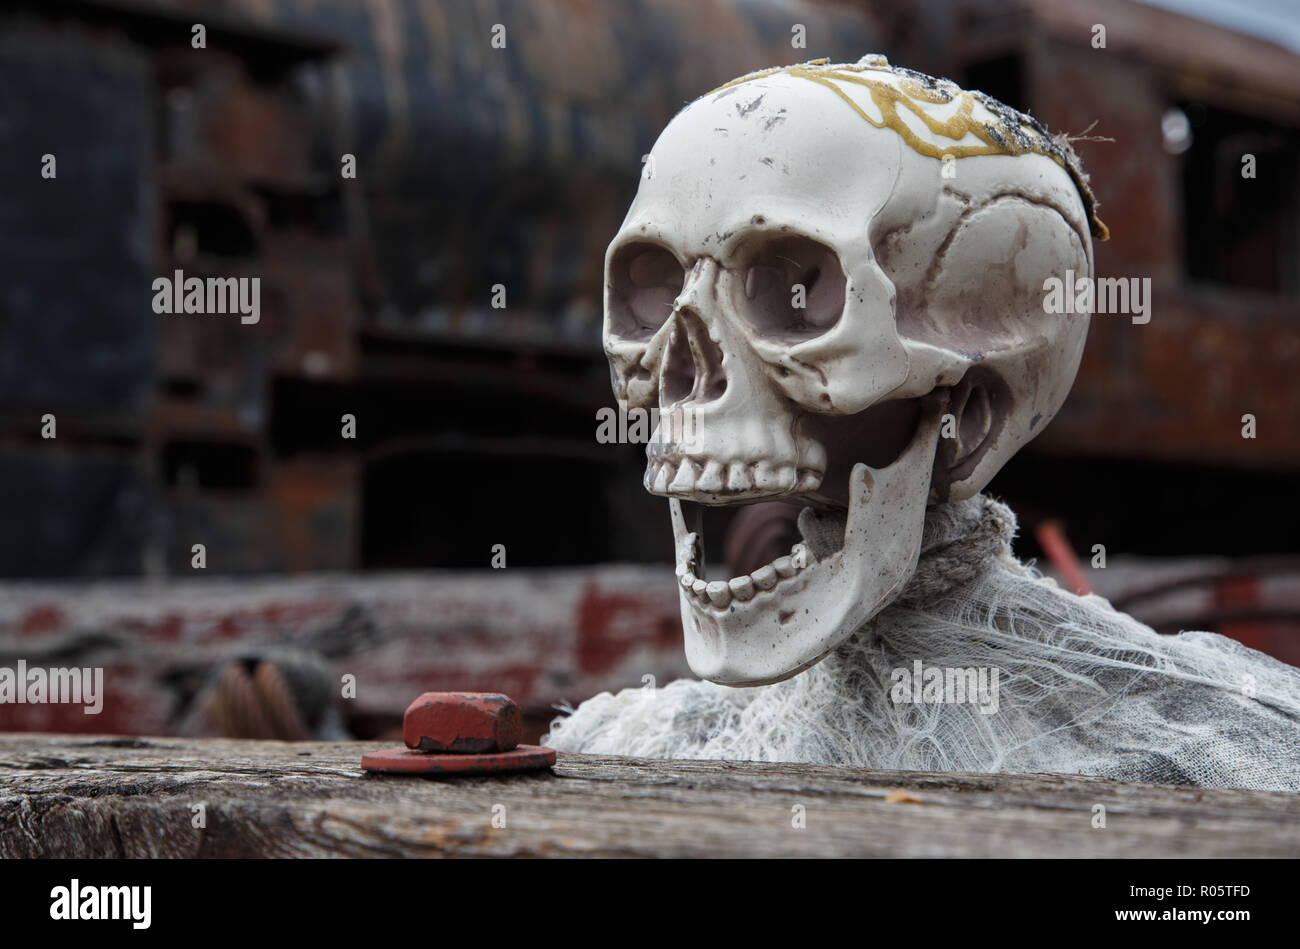 A manufactured human skull with open mouth as if it were screaming. Stock Photo